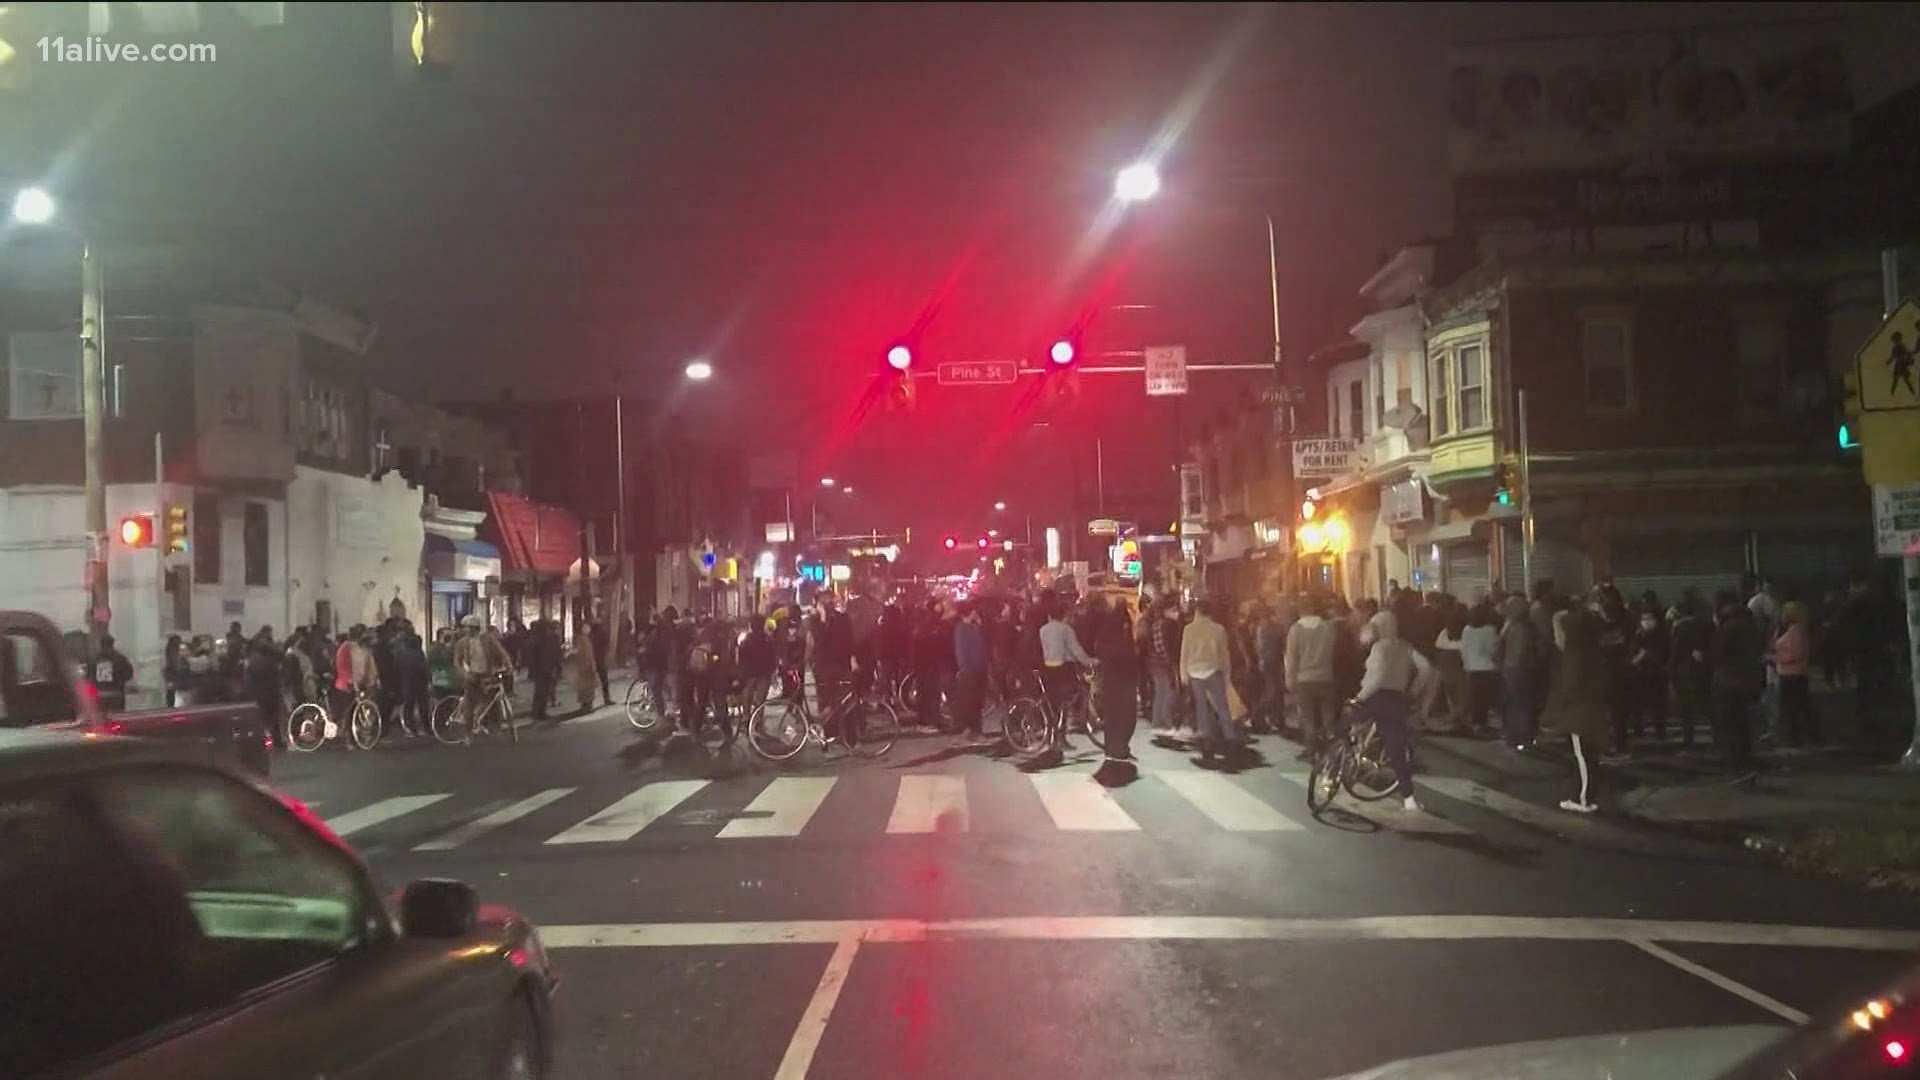 Protests erupted after police shot and killed a 27-year-old Black man on a Philadelphia street after yelling at him to drop his knife.